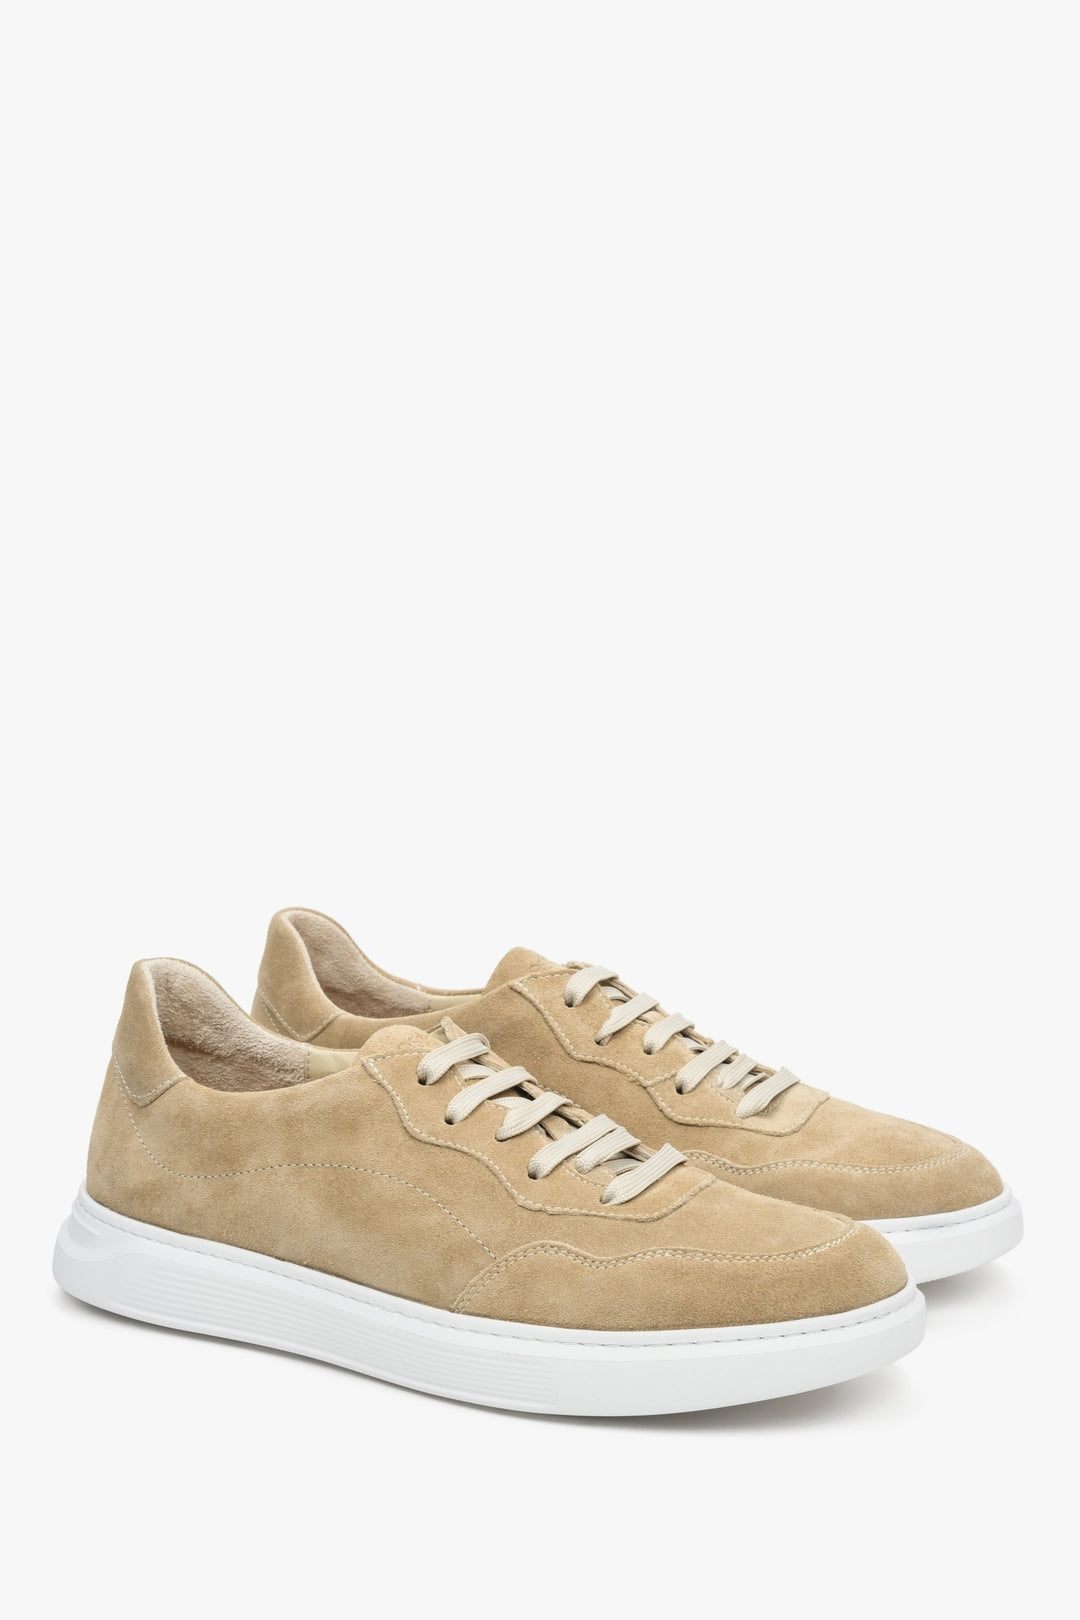 Lace-up men's Estro sneakers in natural velour in sand beige.